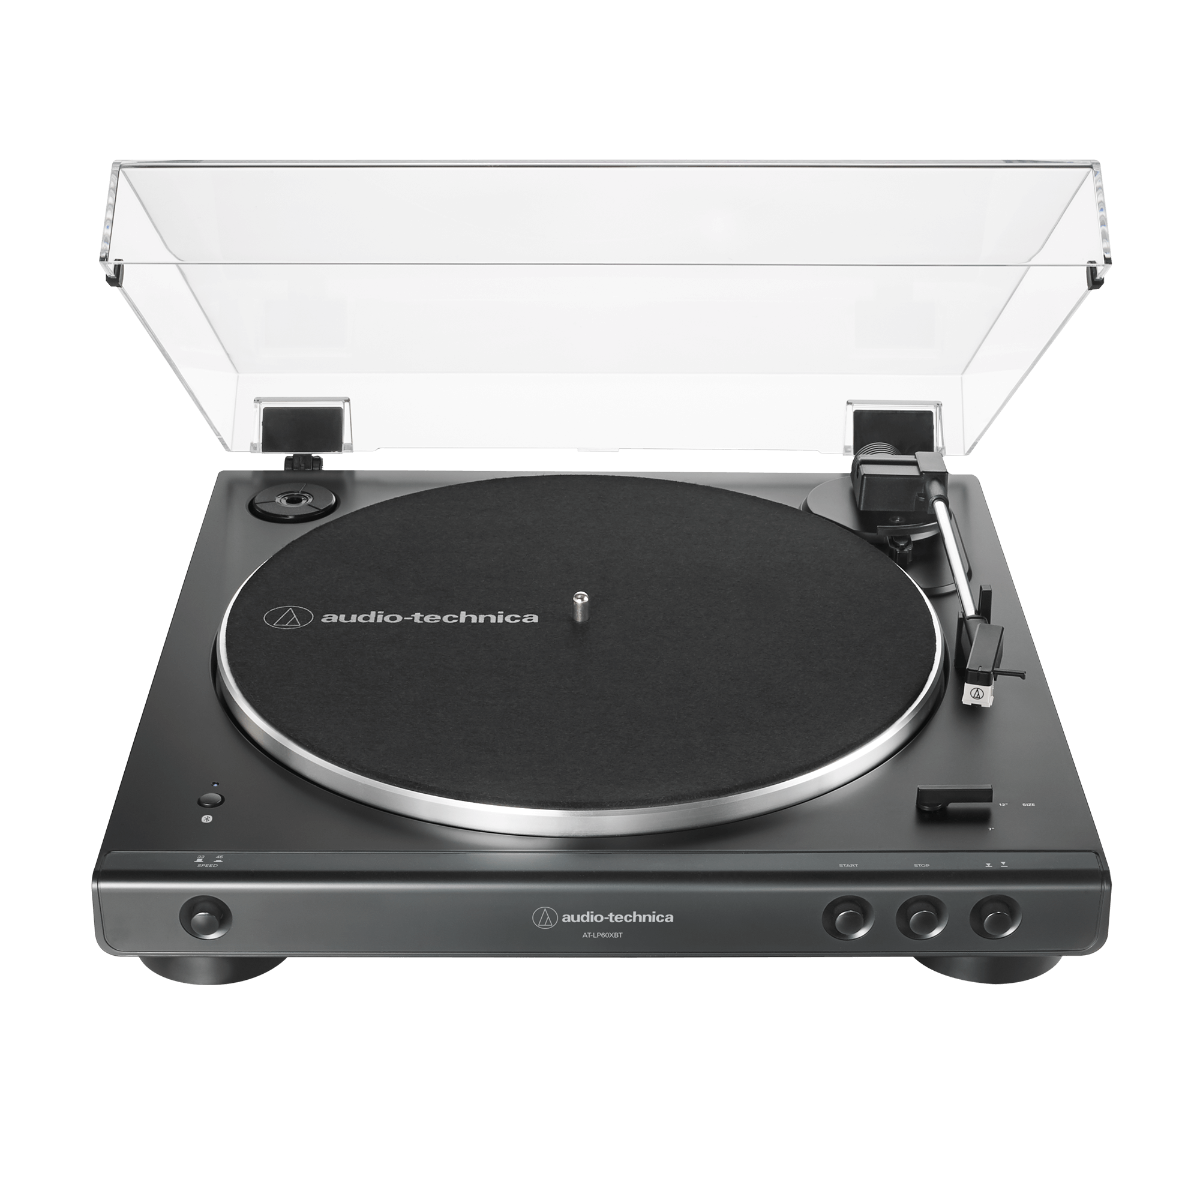 Audio-Technica white background product image of the AT-LP60XBT Turntable